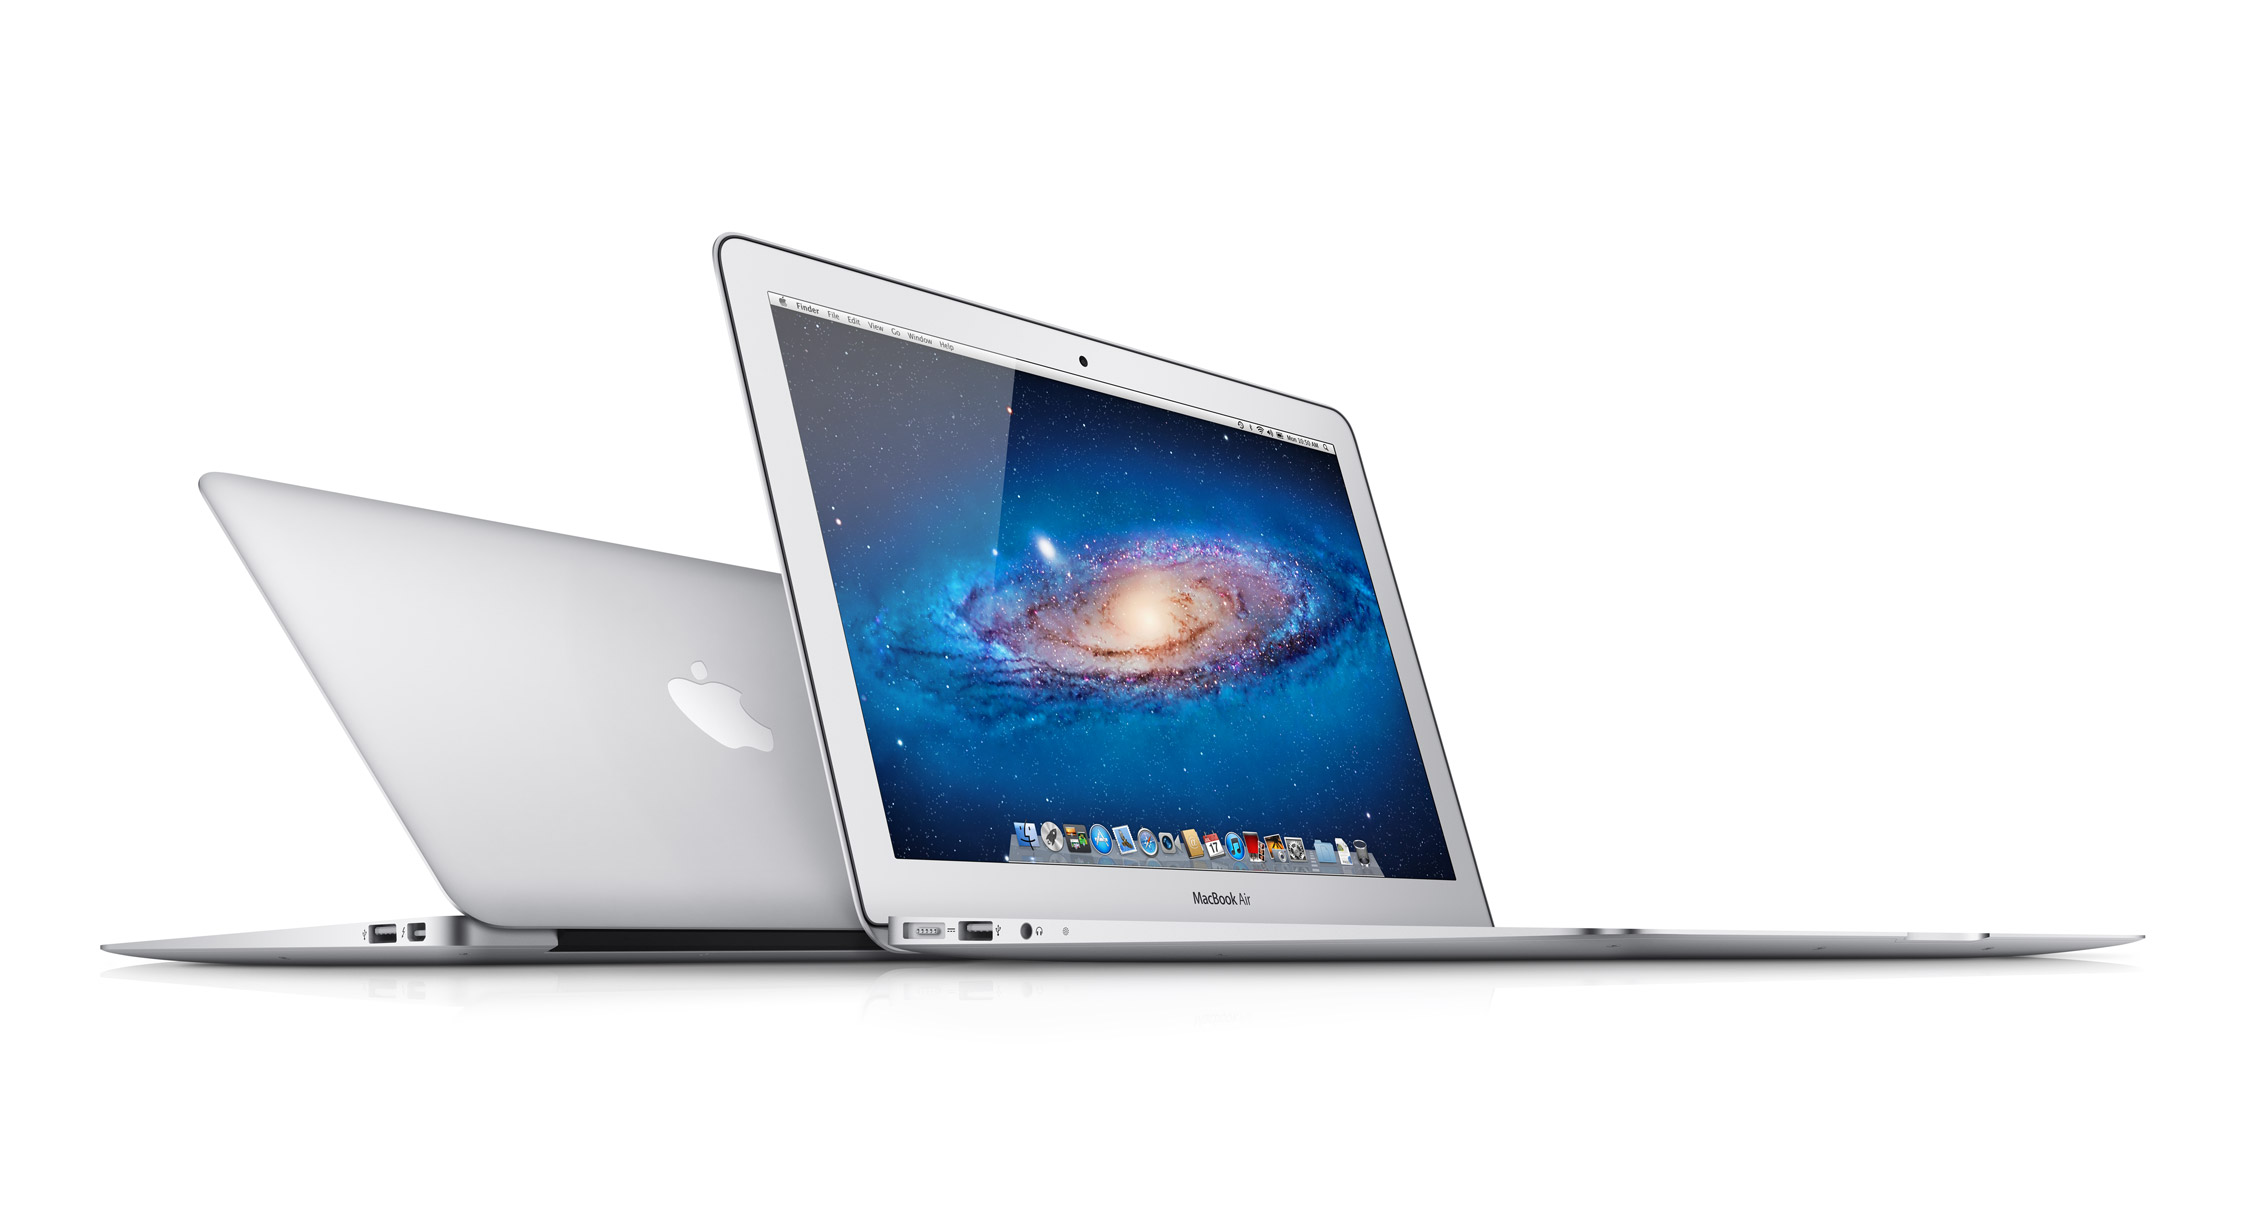 MacBook Air 11-inch and 13-inch updated with Intel Core i5/i7 Ivy